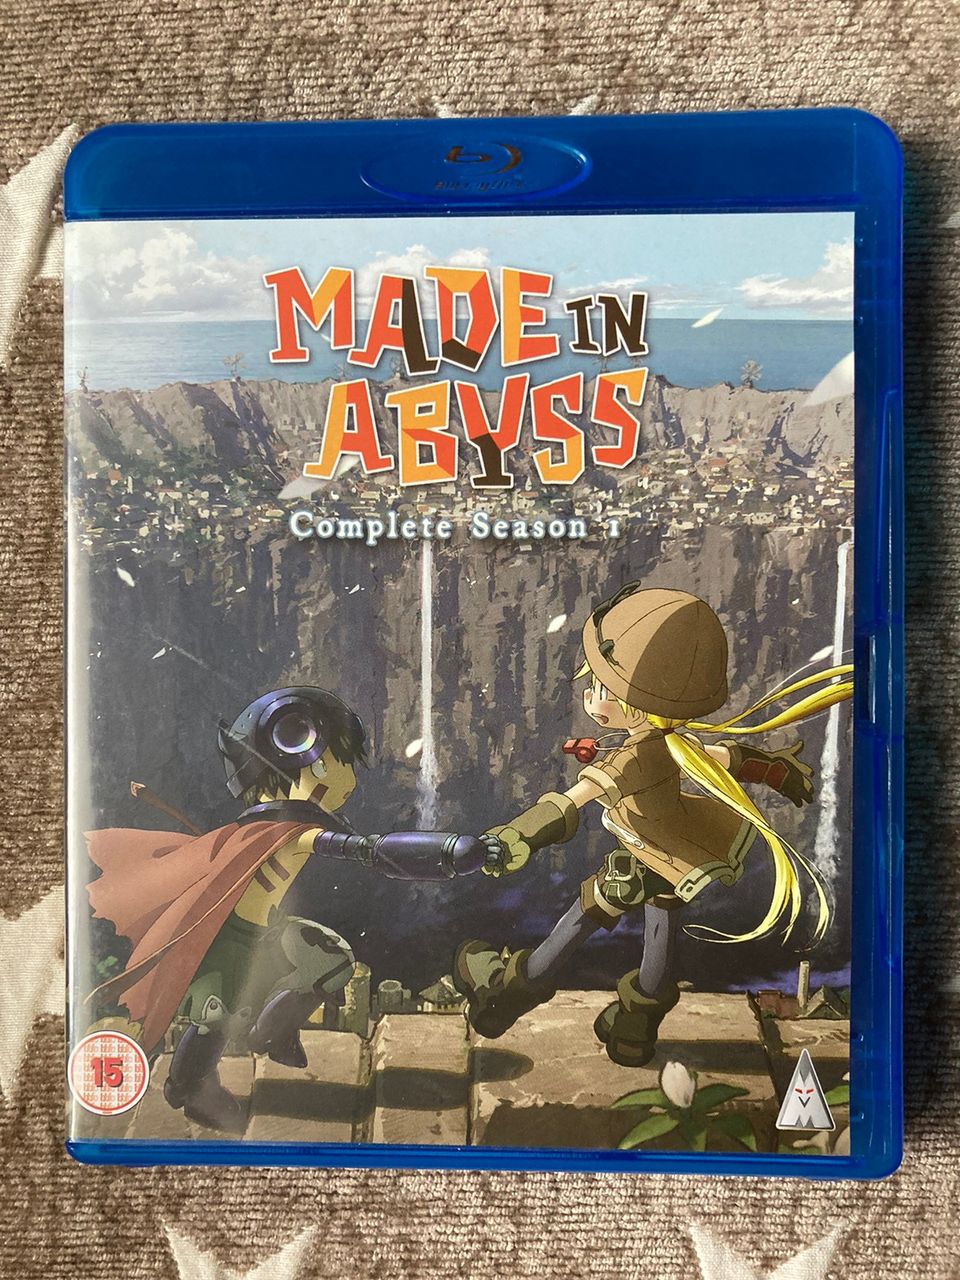 Made In Abyss bluray sarja